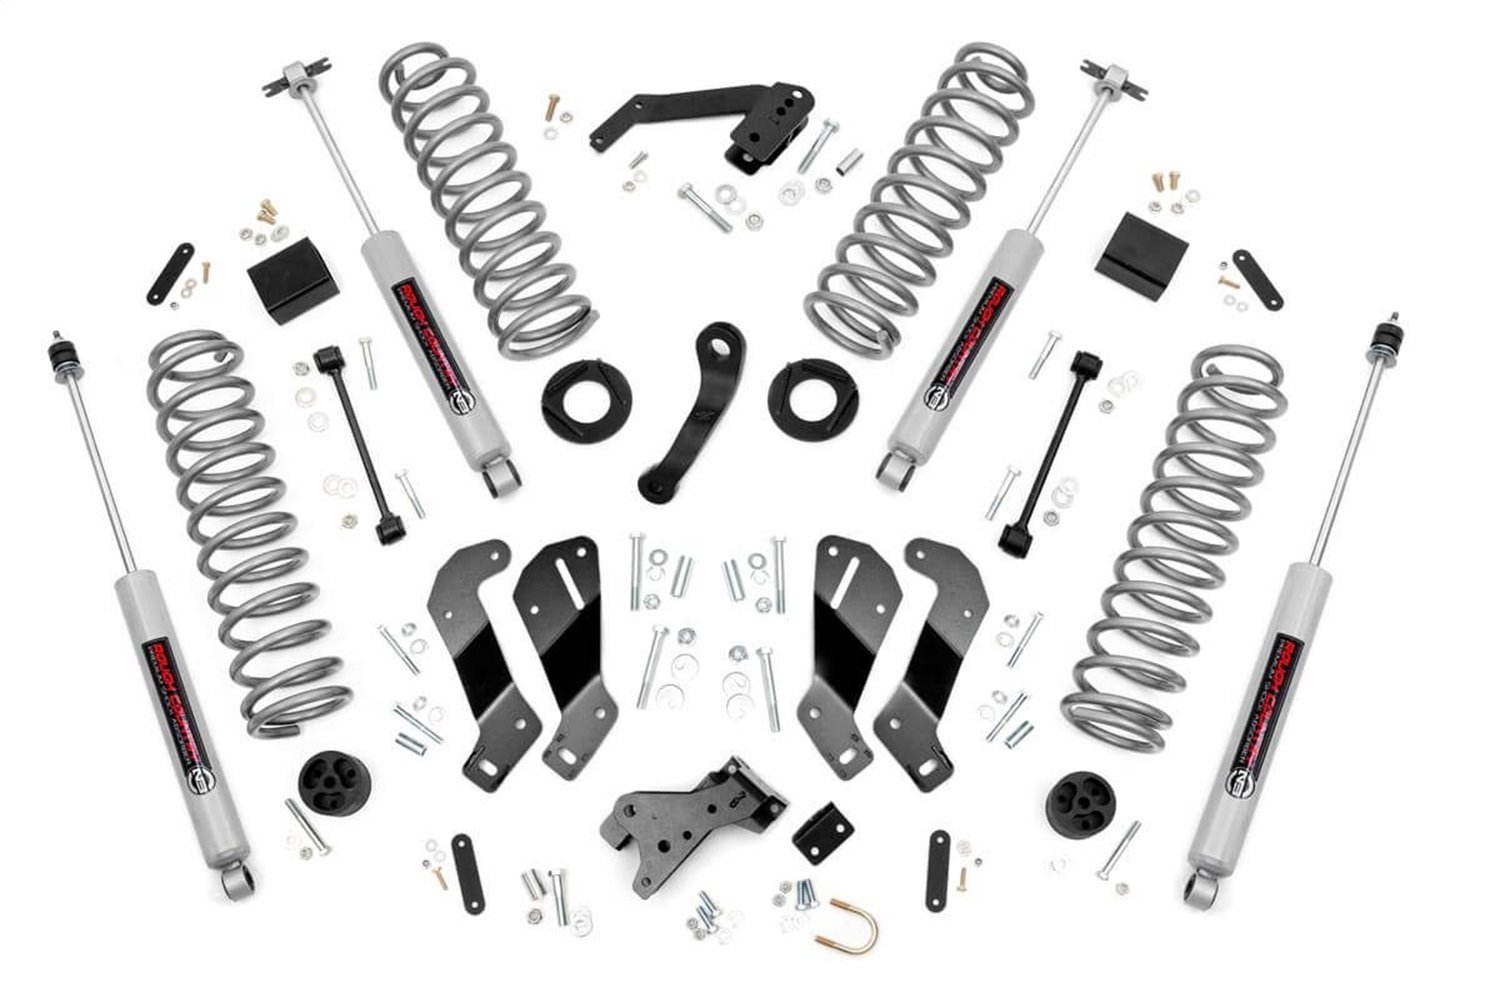 69330 Front and Rear Suspension Lift Kit, Lift Amount: 3.5 in. Front/3.5 in. Rear